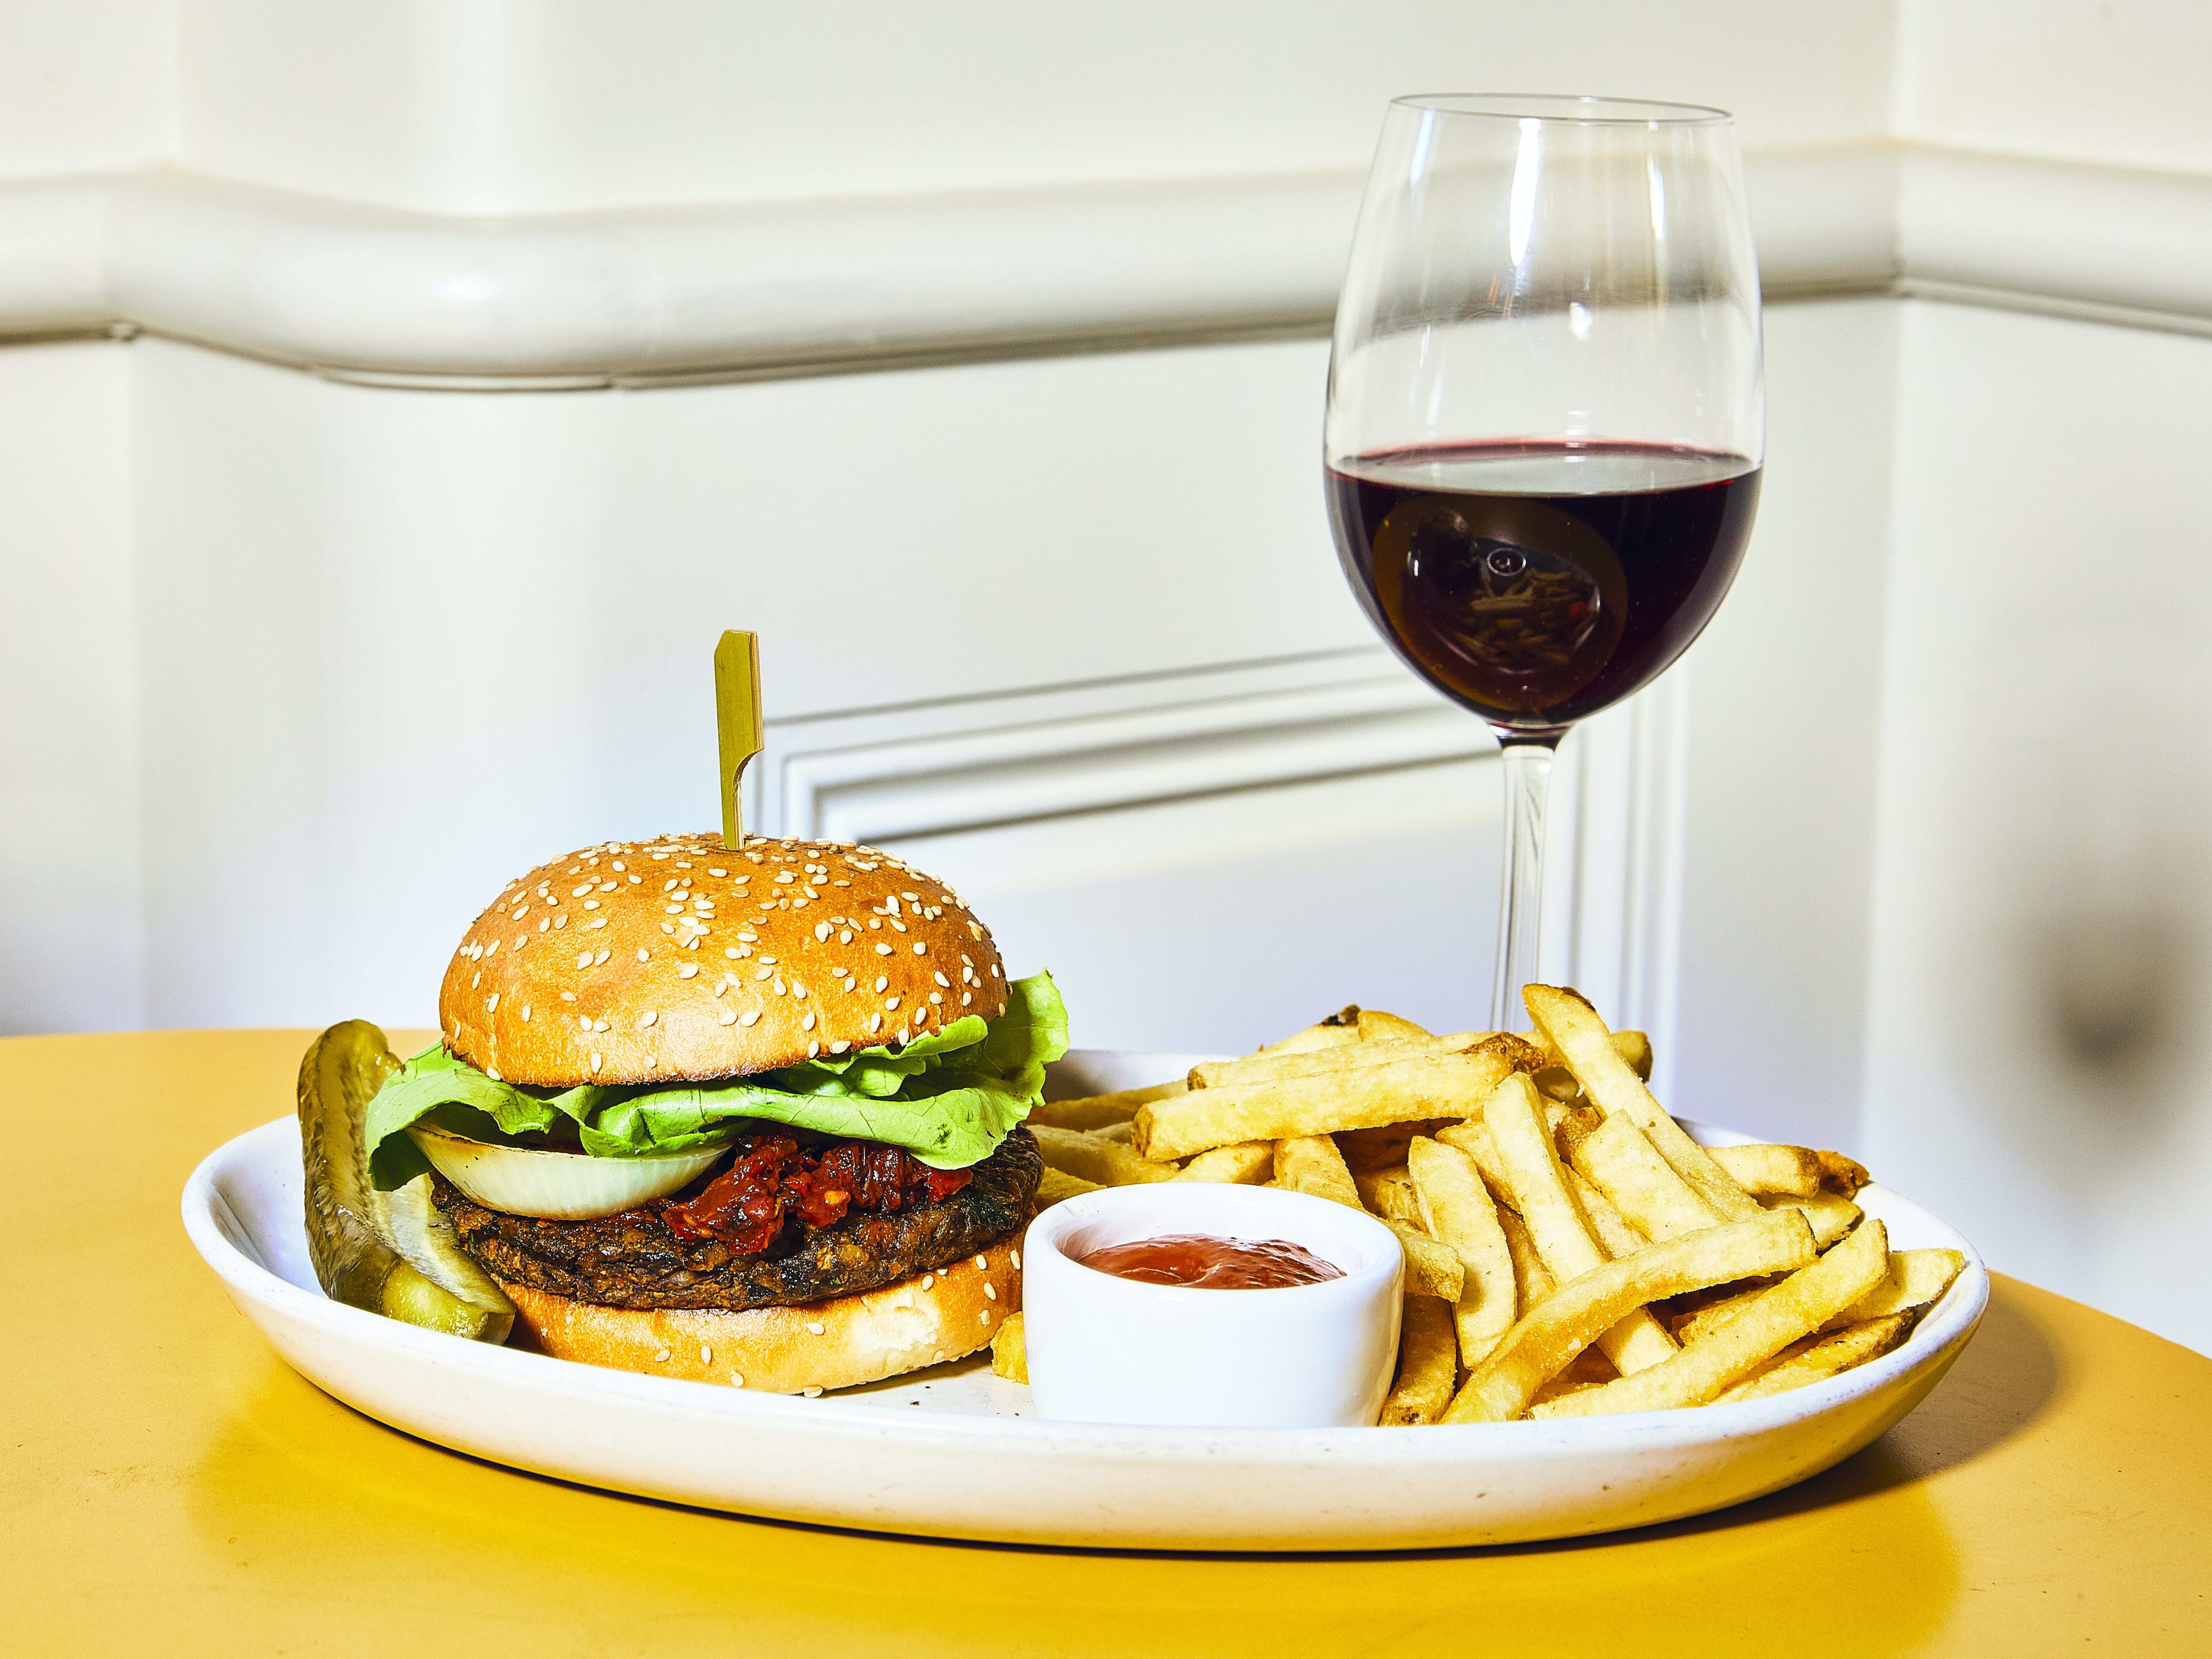 burger with fries and ketchup next to a glass of red wine